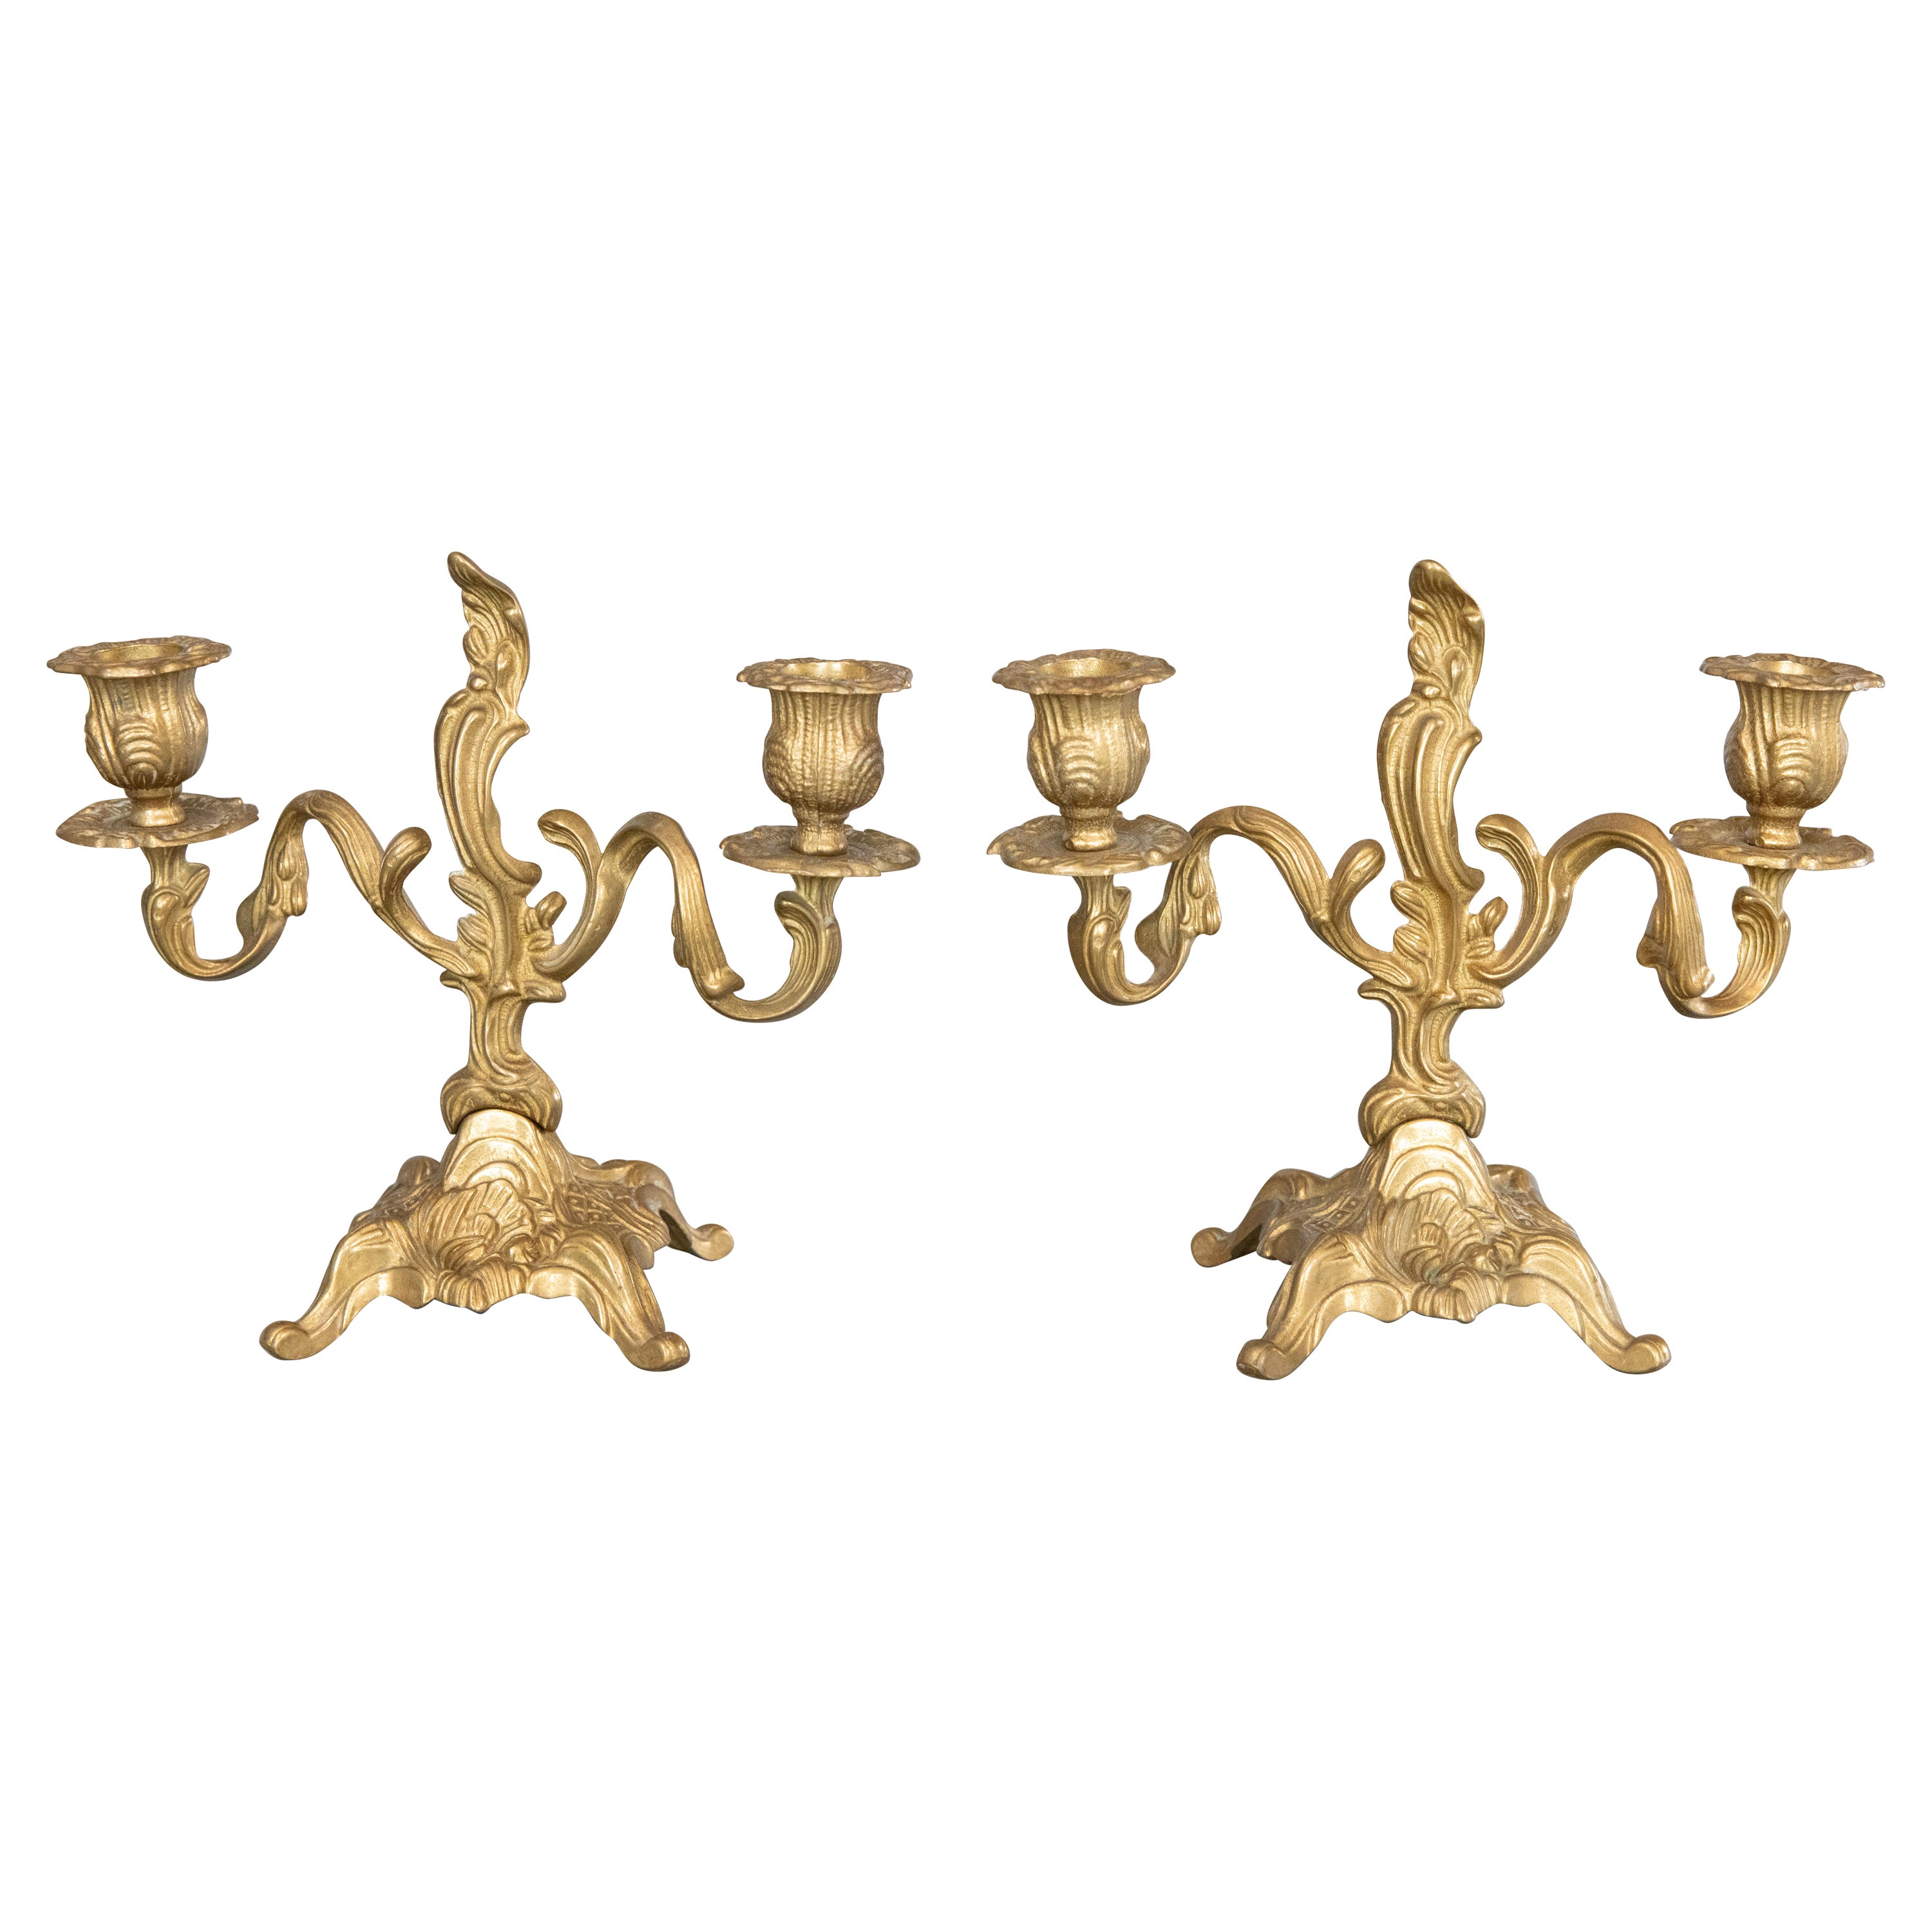 Pair of Italian Rococo Style Gilt Brass Candelabras Candle Holders, circa 1950 For Sale